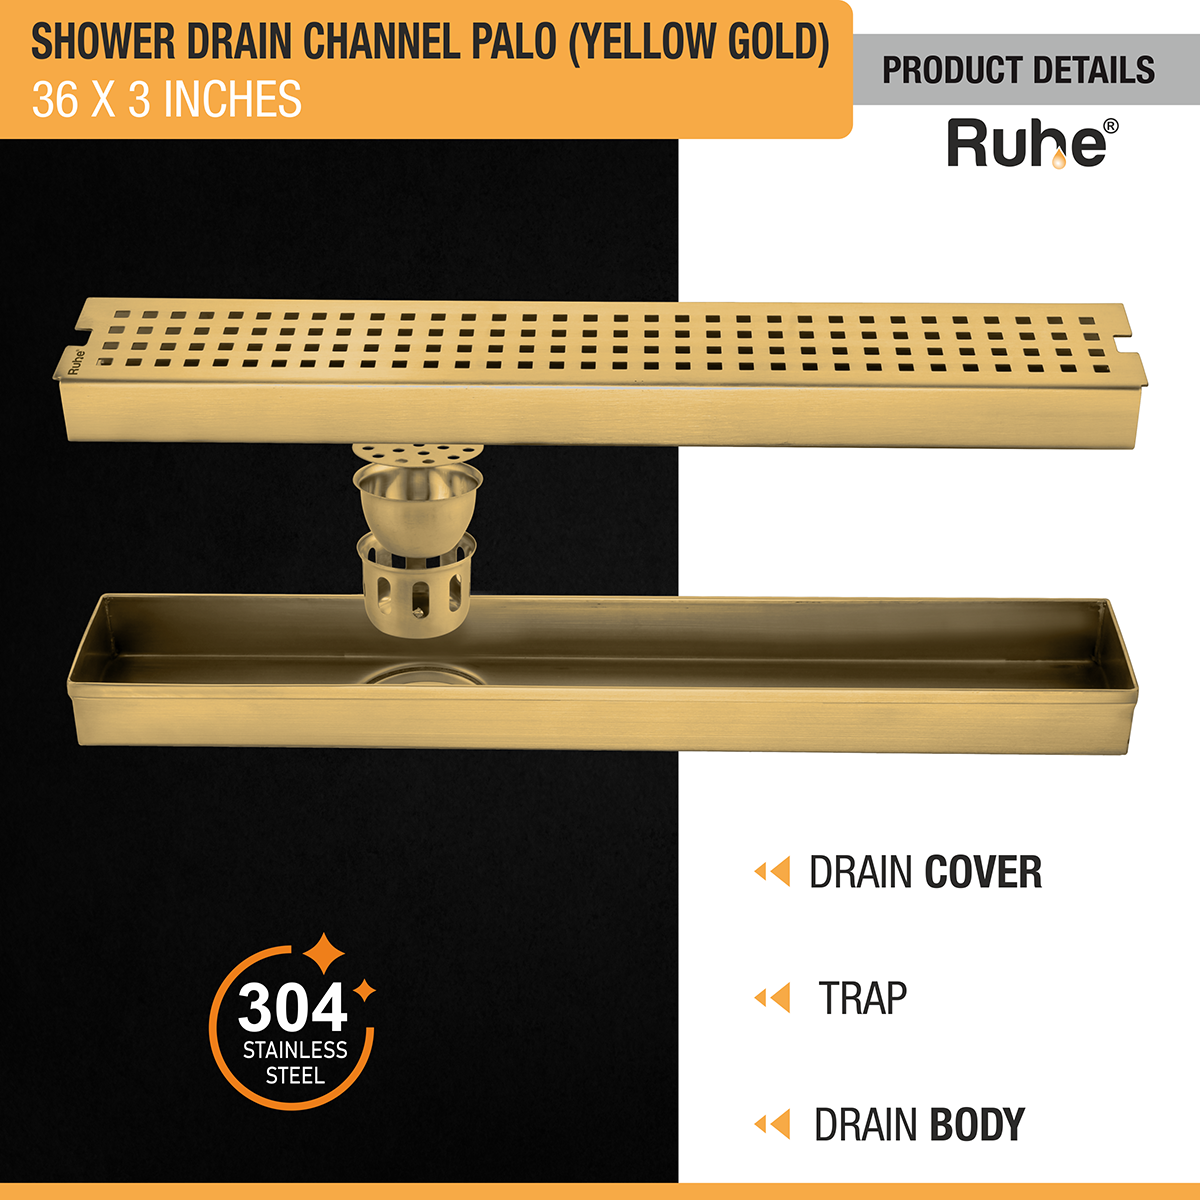 Palo Shower Drain Channel (36 x 3 Inches) YELLOW GOLD product details